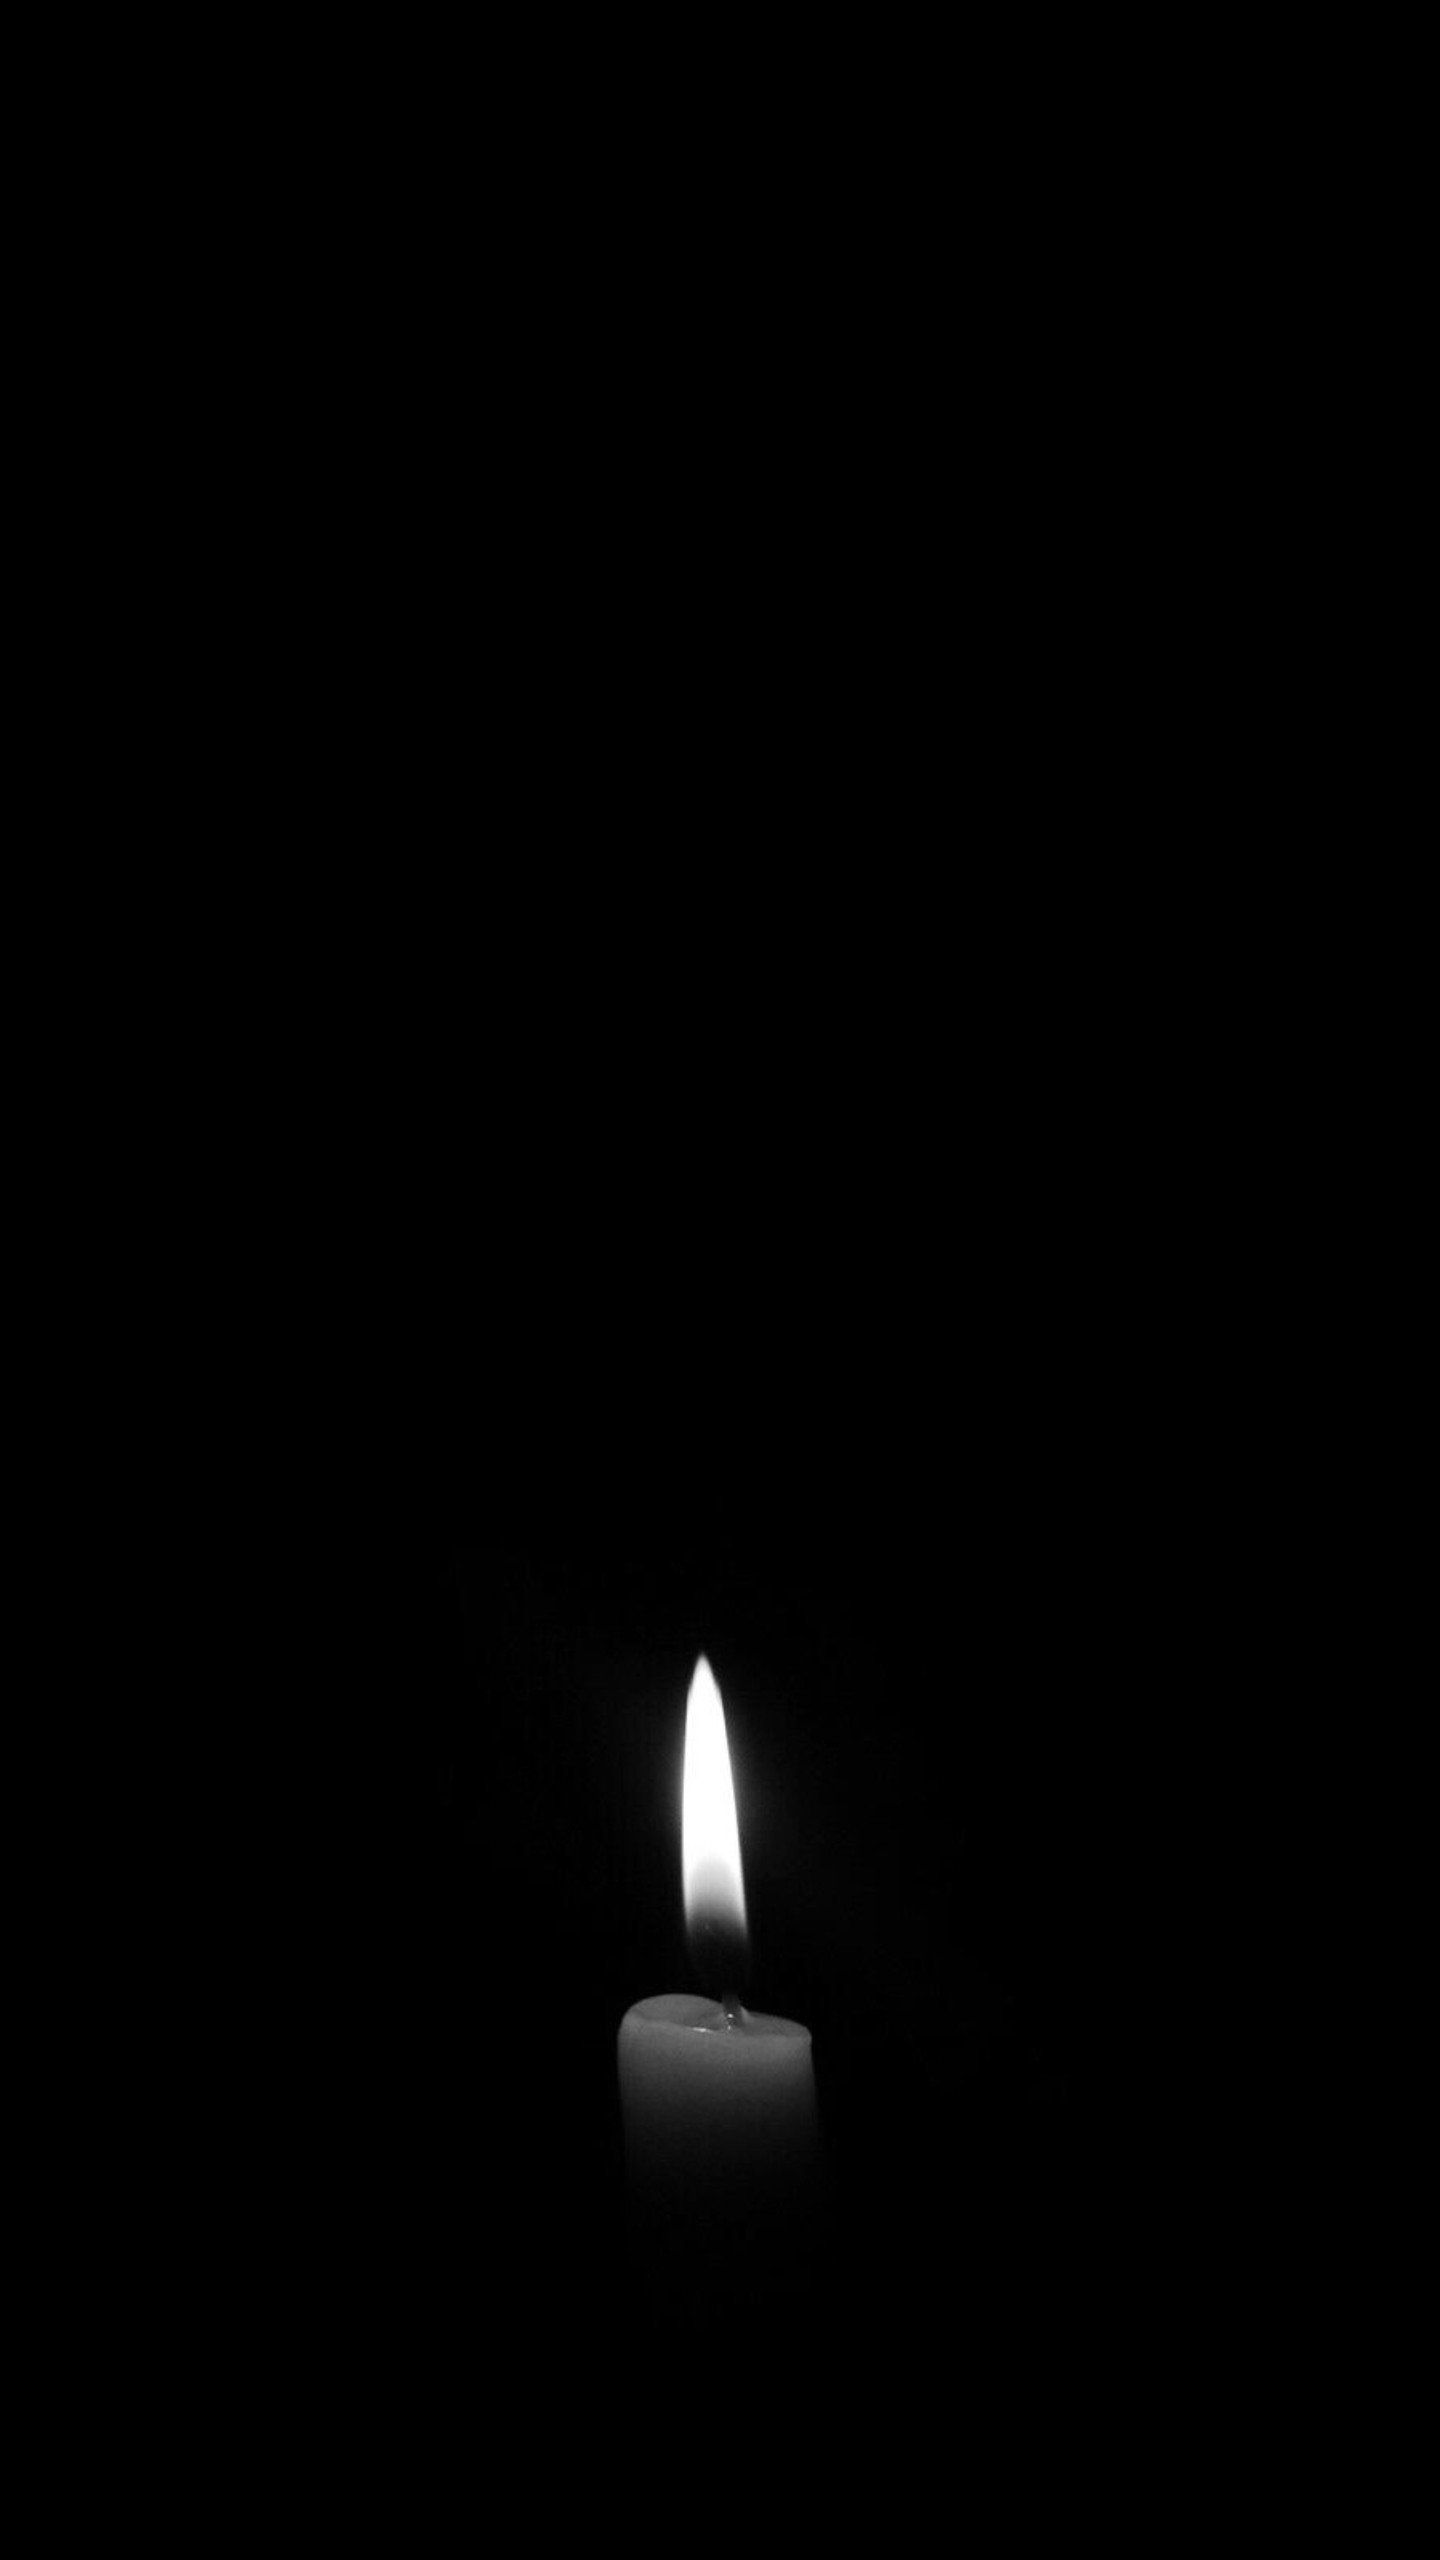 Candle Dark Monochrome, HD Photography Wallpaper Photo and Picture. Black background wallpaper, Candles wallpaper, Photography wallpaper